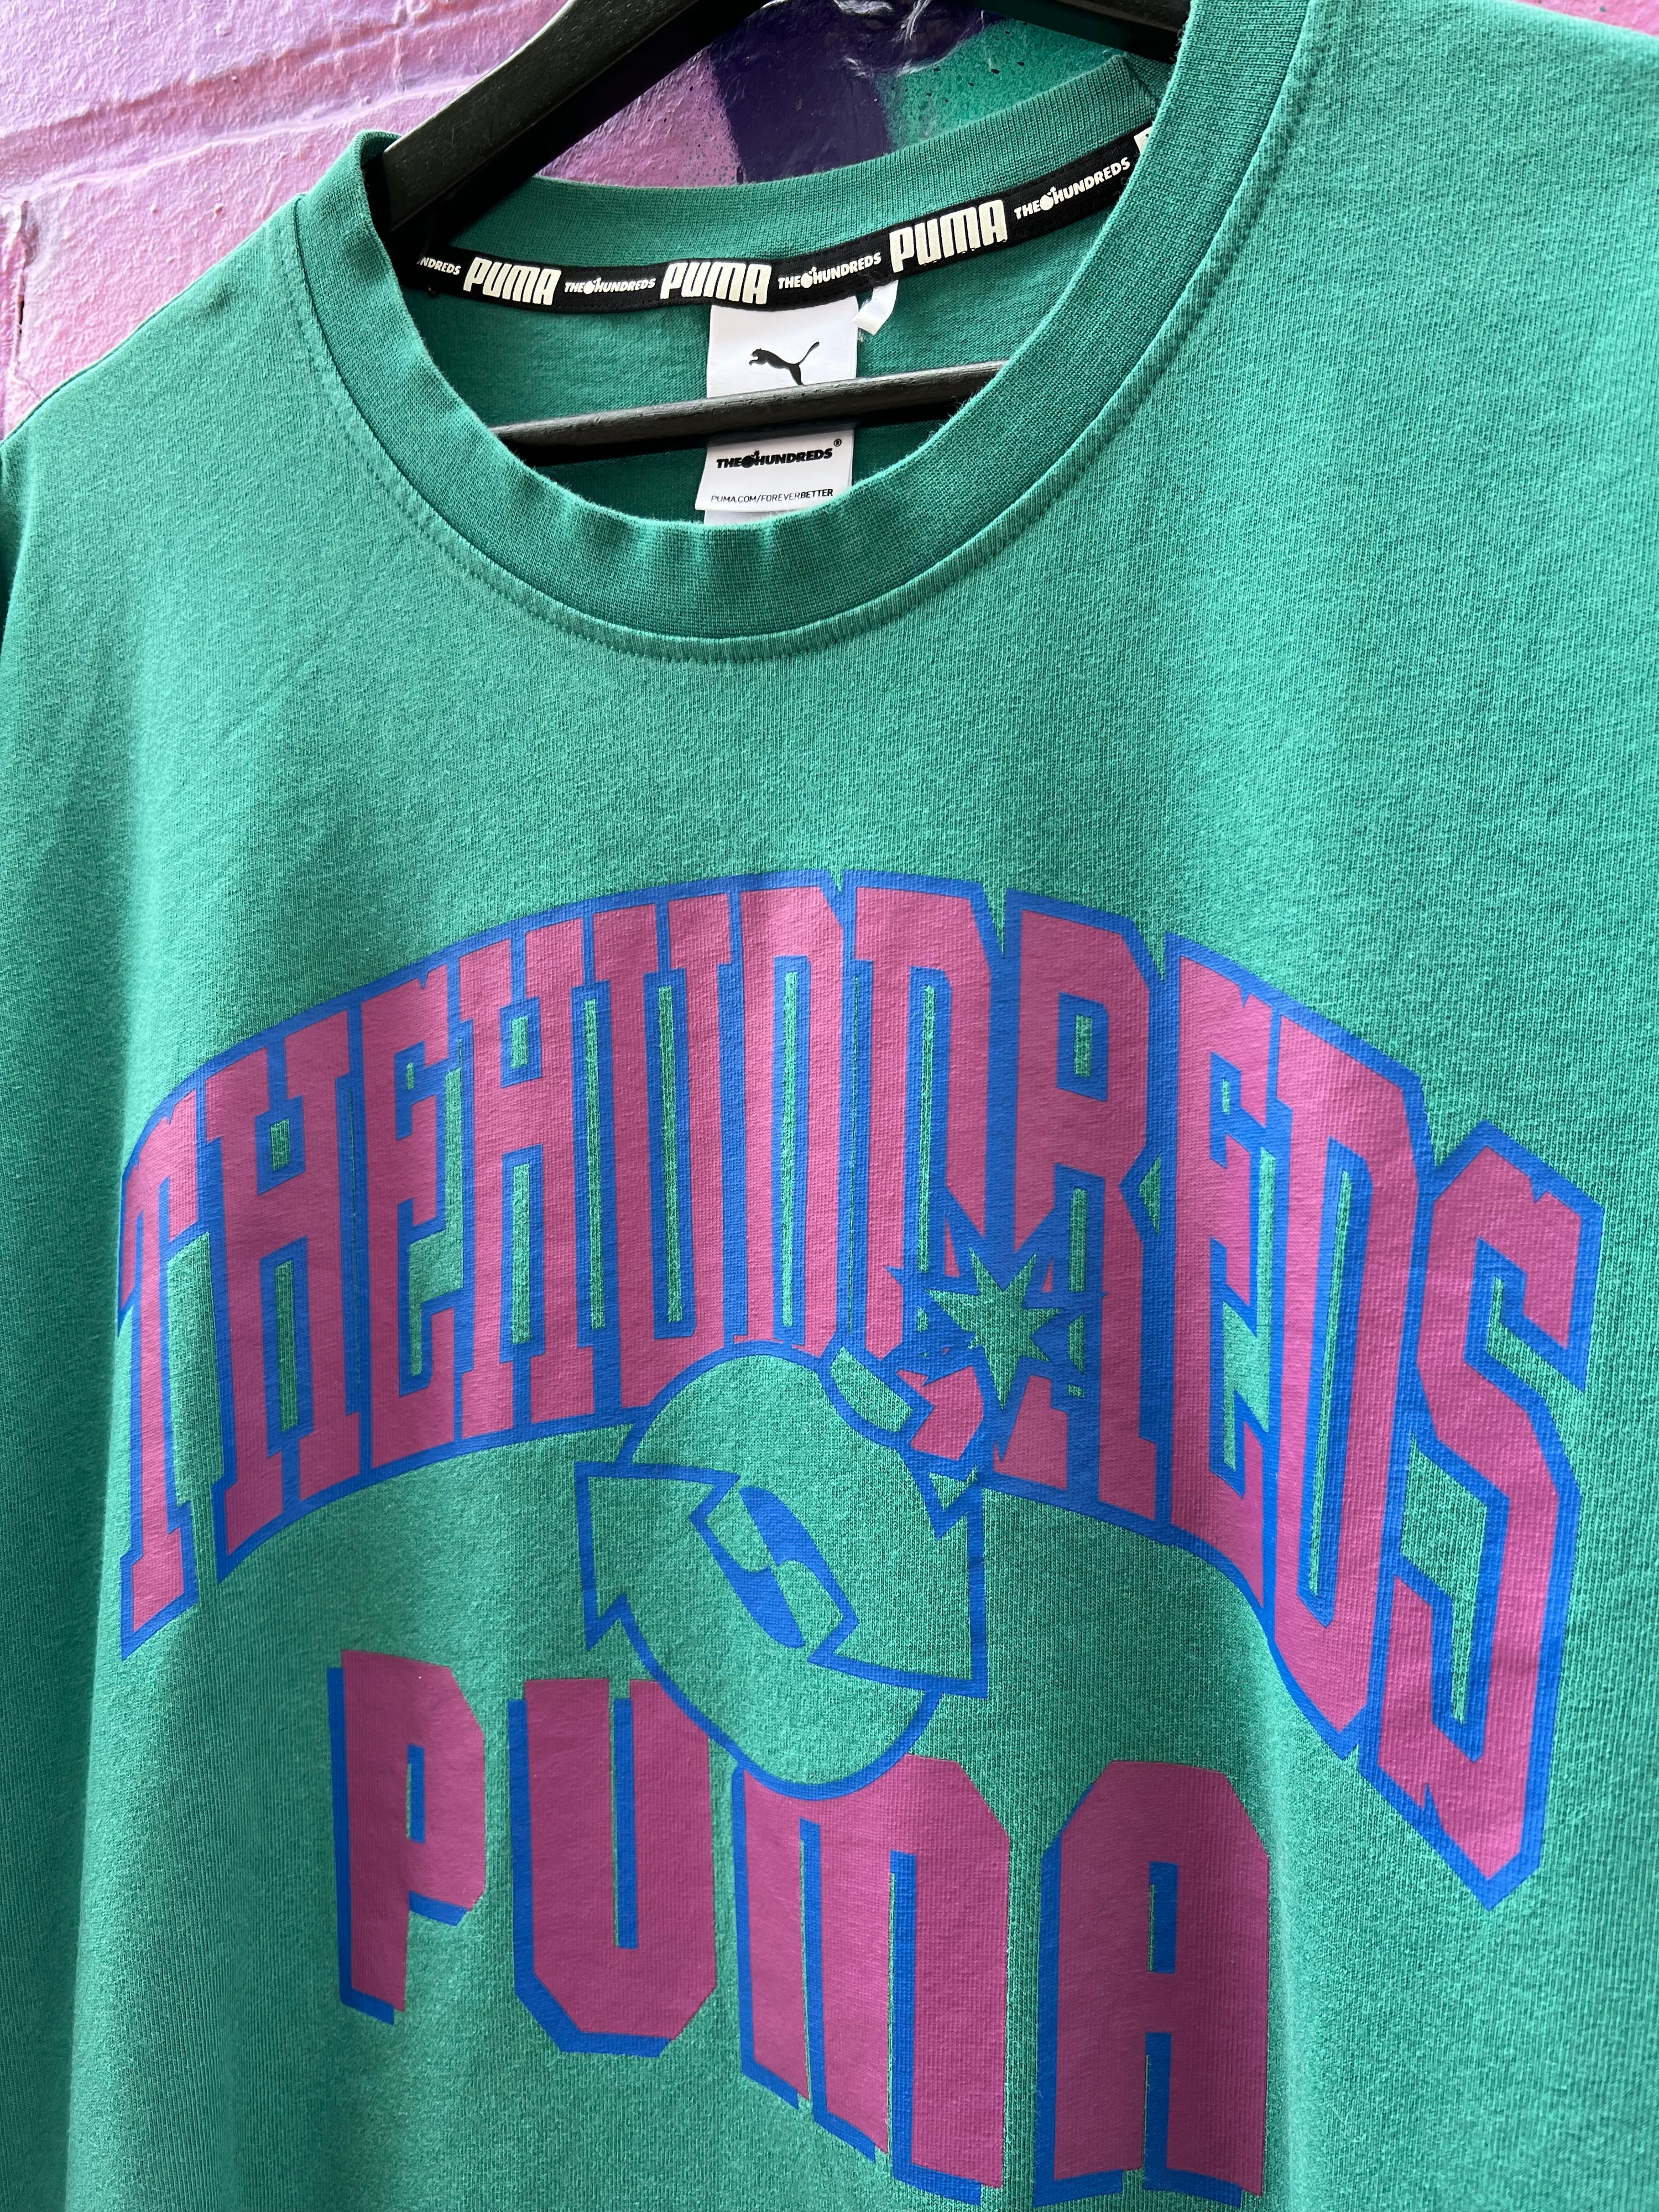 XL - Puma x The Hundreds For The World DS Tee